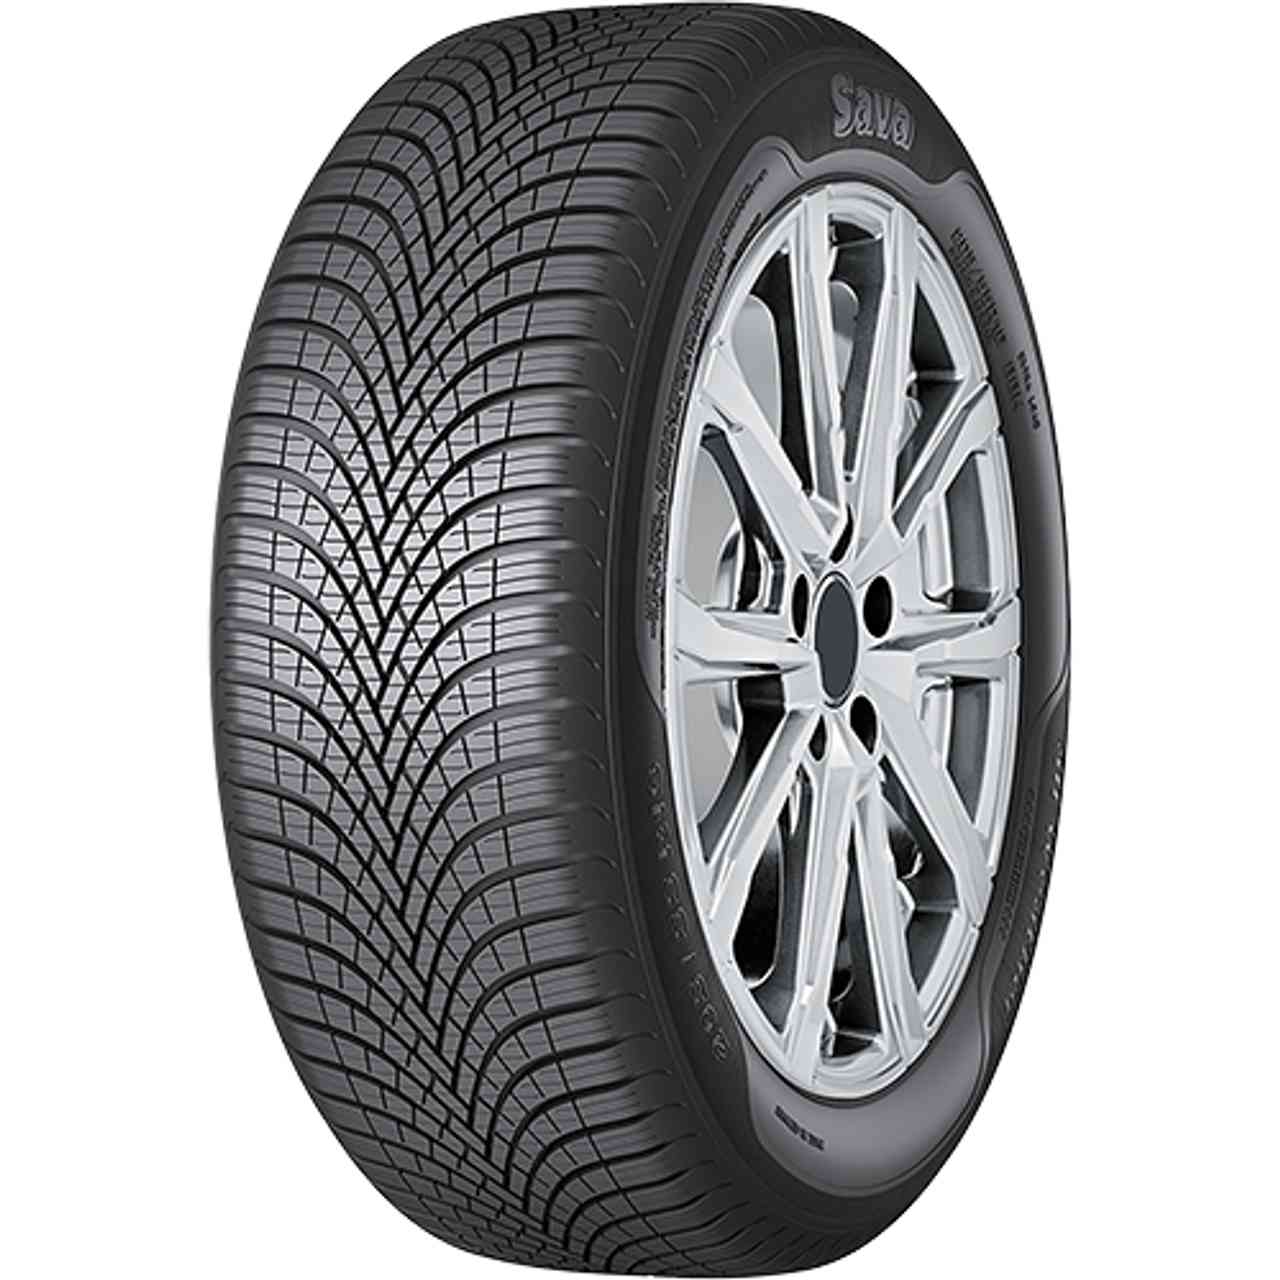 SAVA ALL WEATHER 235/55R18 104V BSW